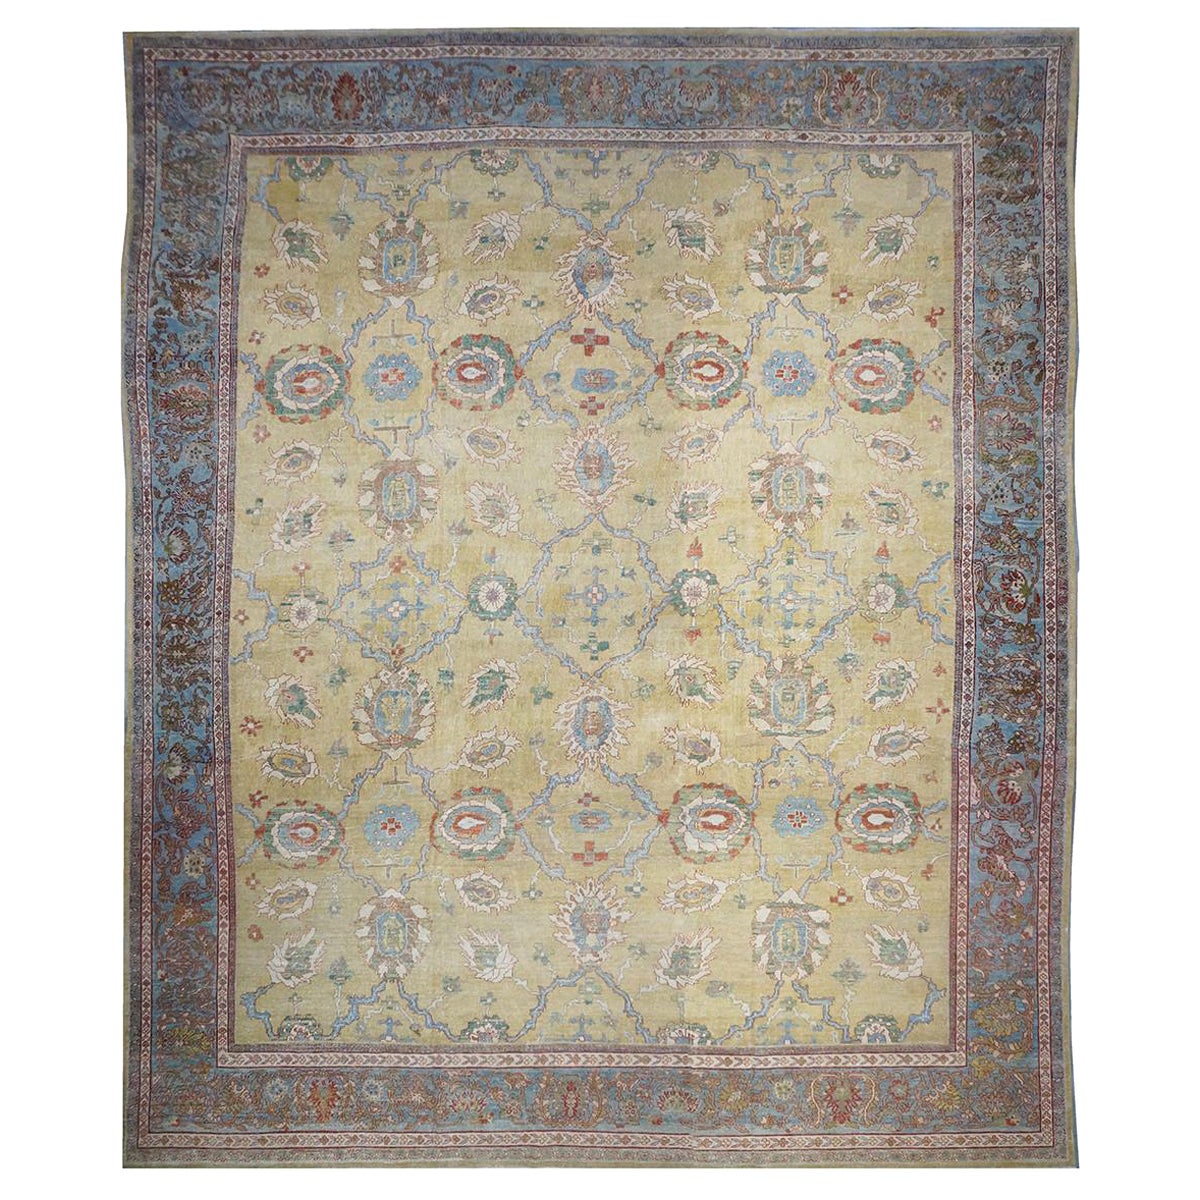 1880s Antique Persian Sultanabad 16x19 Tan, Blue, & Ivory Handmade Area Rug